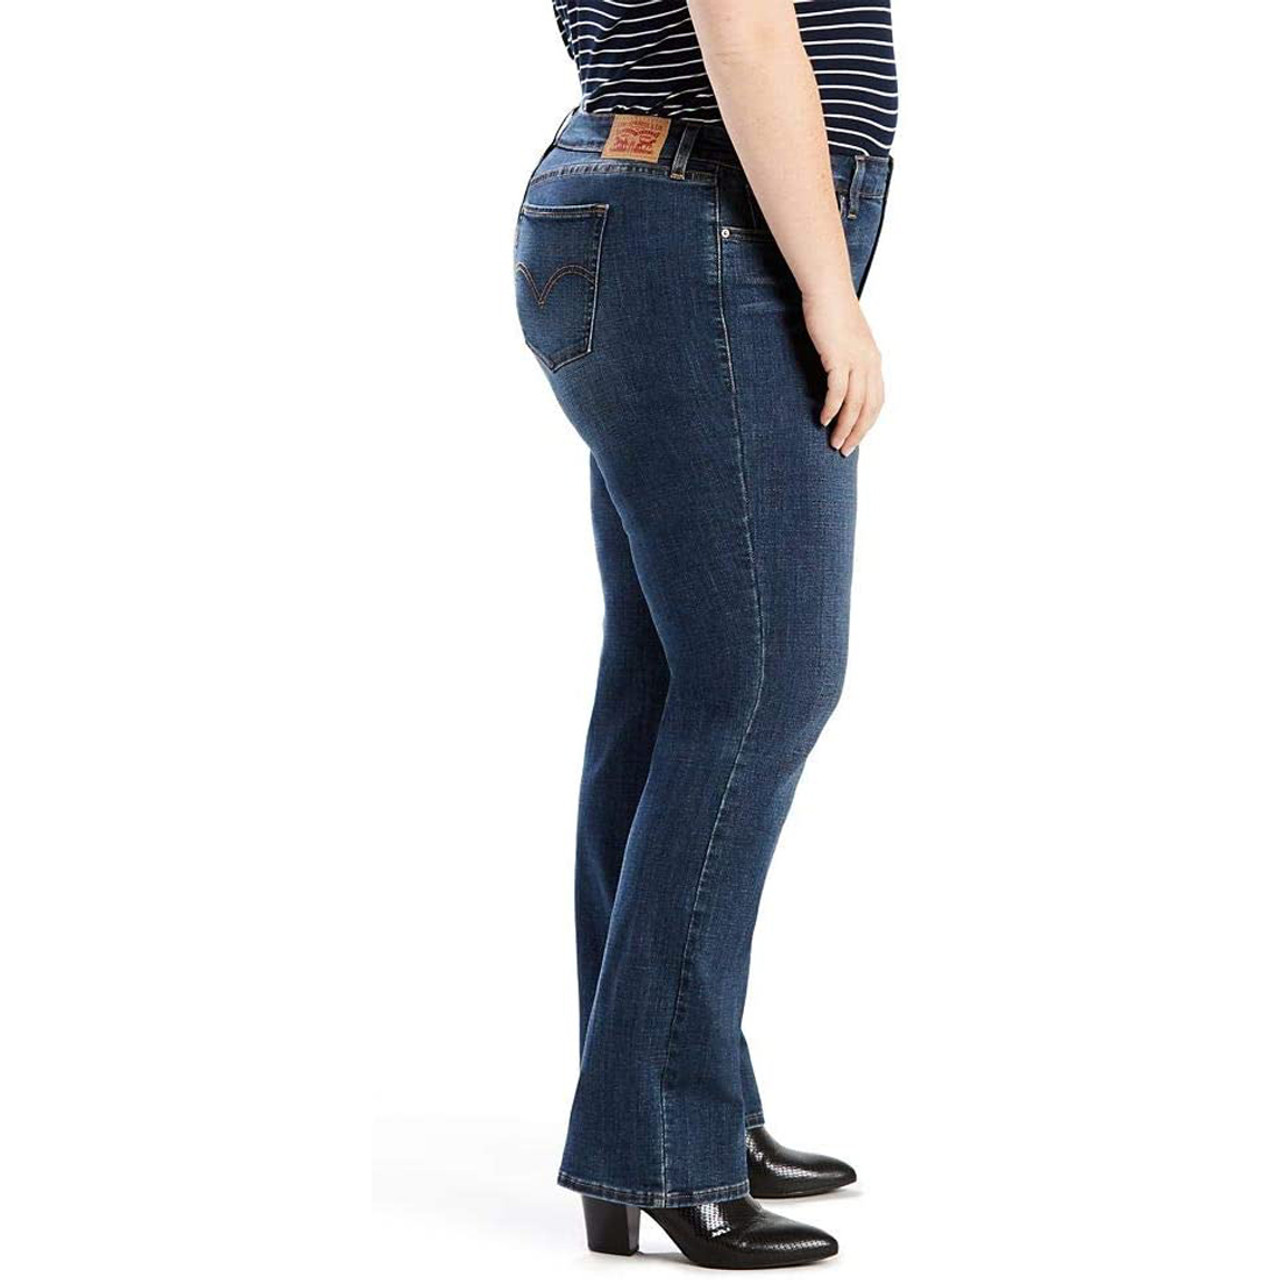 Levi's Plus-Size 414 Classic Straight Jeans, Oak Blues, 40 (US 20) S -  Discount Scrubs and Fashion